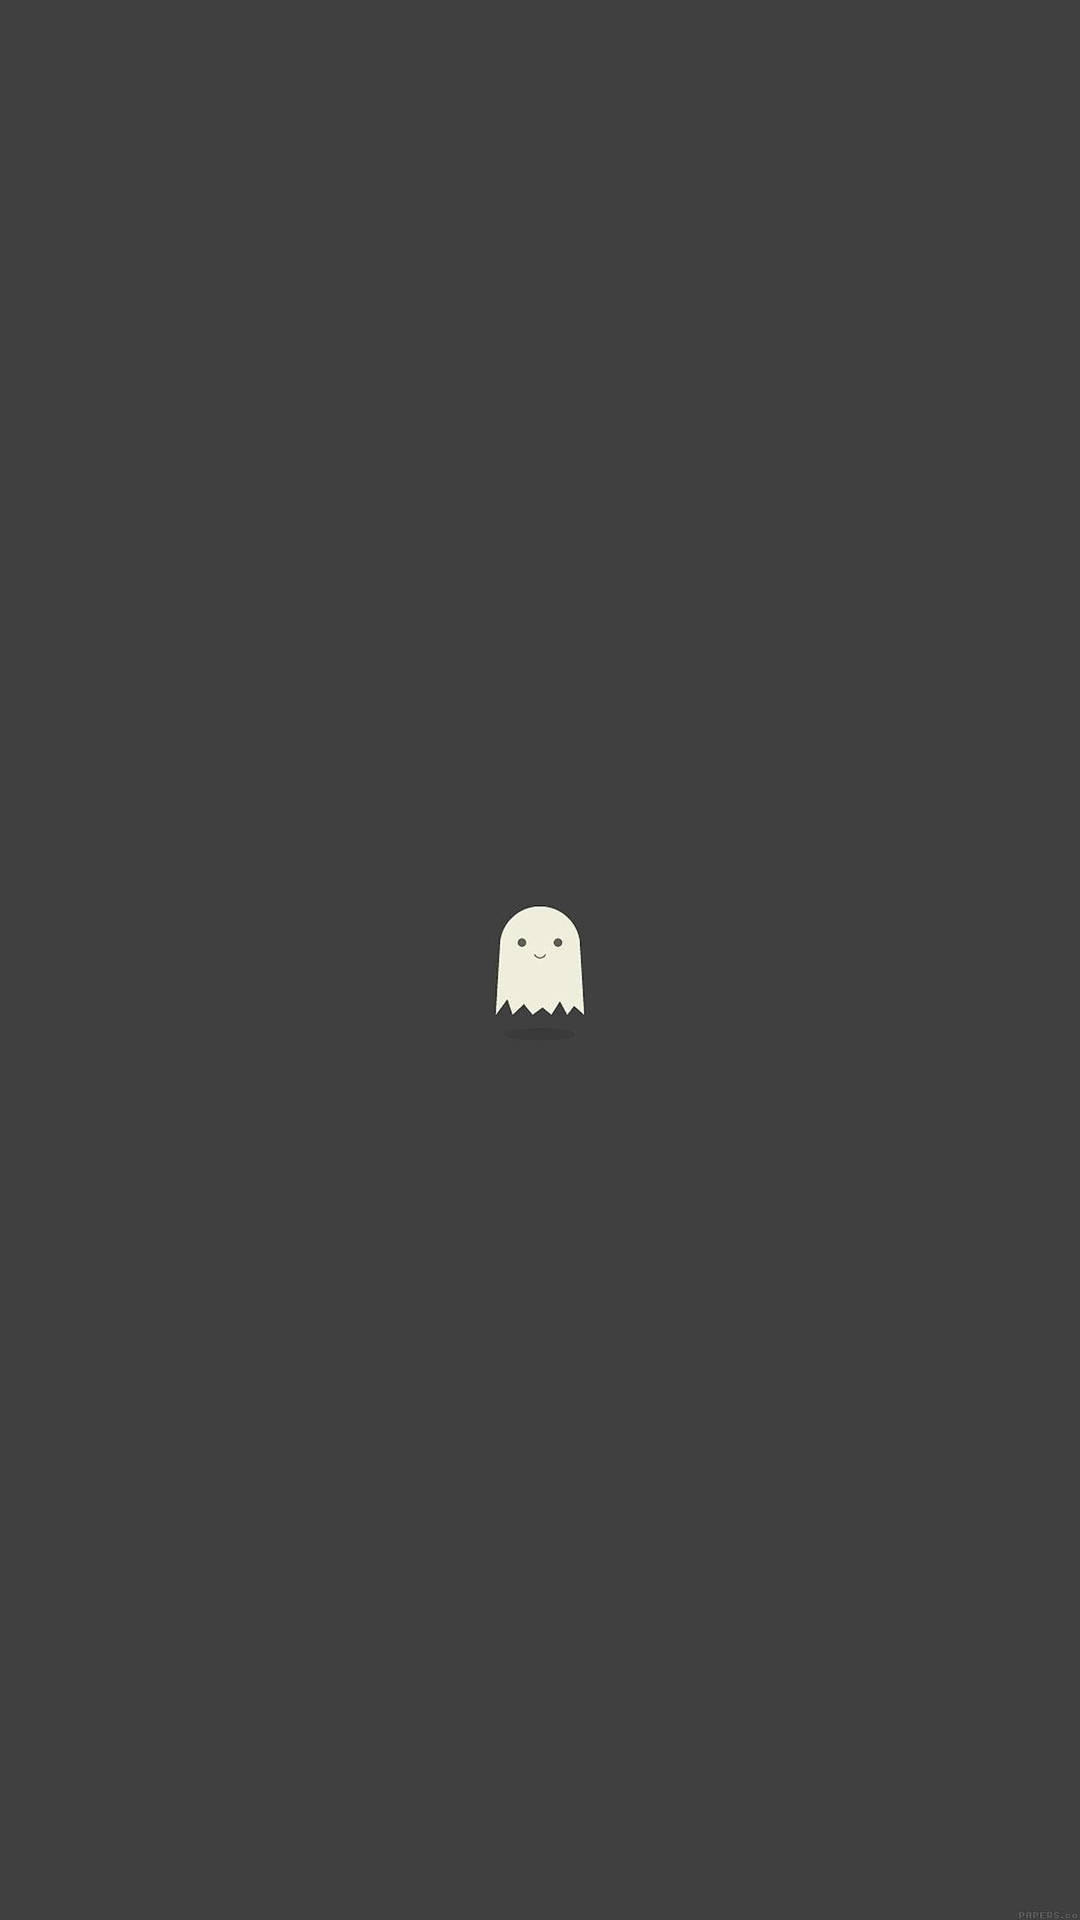 Cool Simple Cute Ghost For Iphone Wallpaper